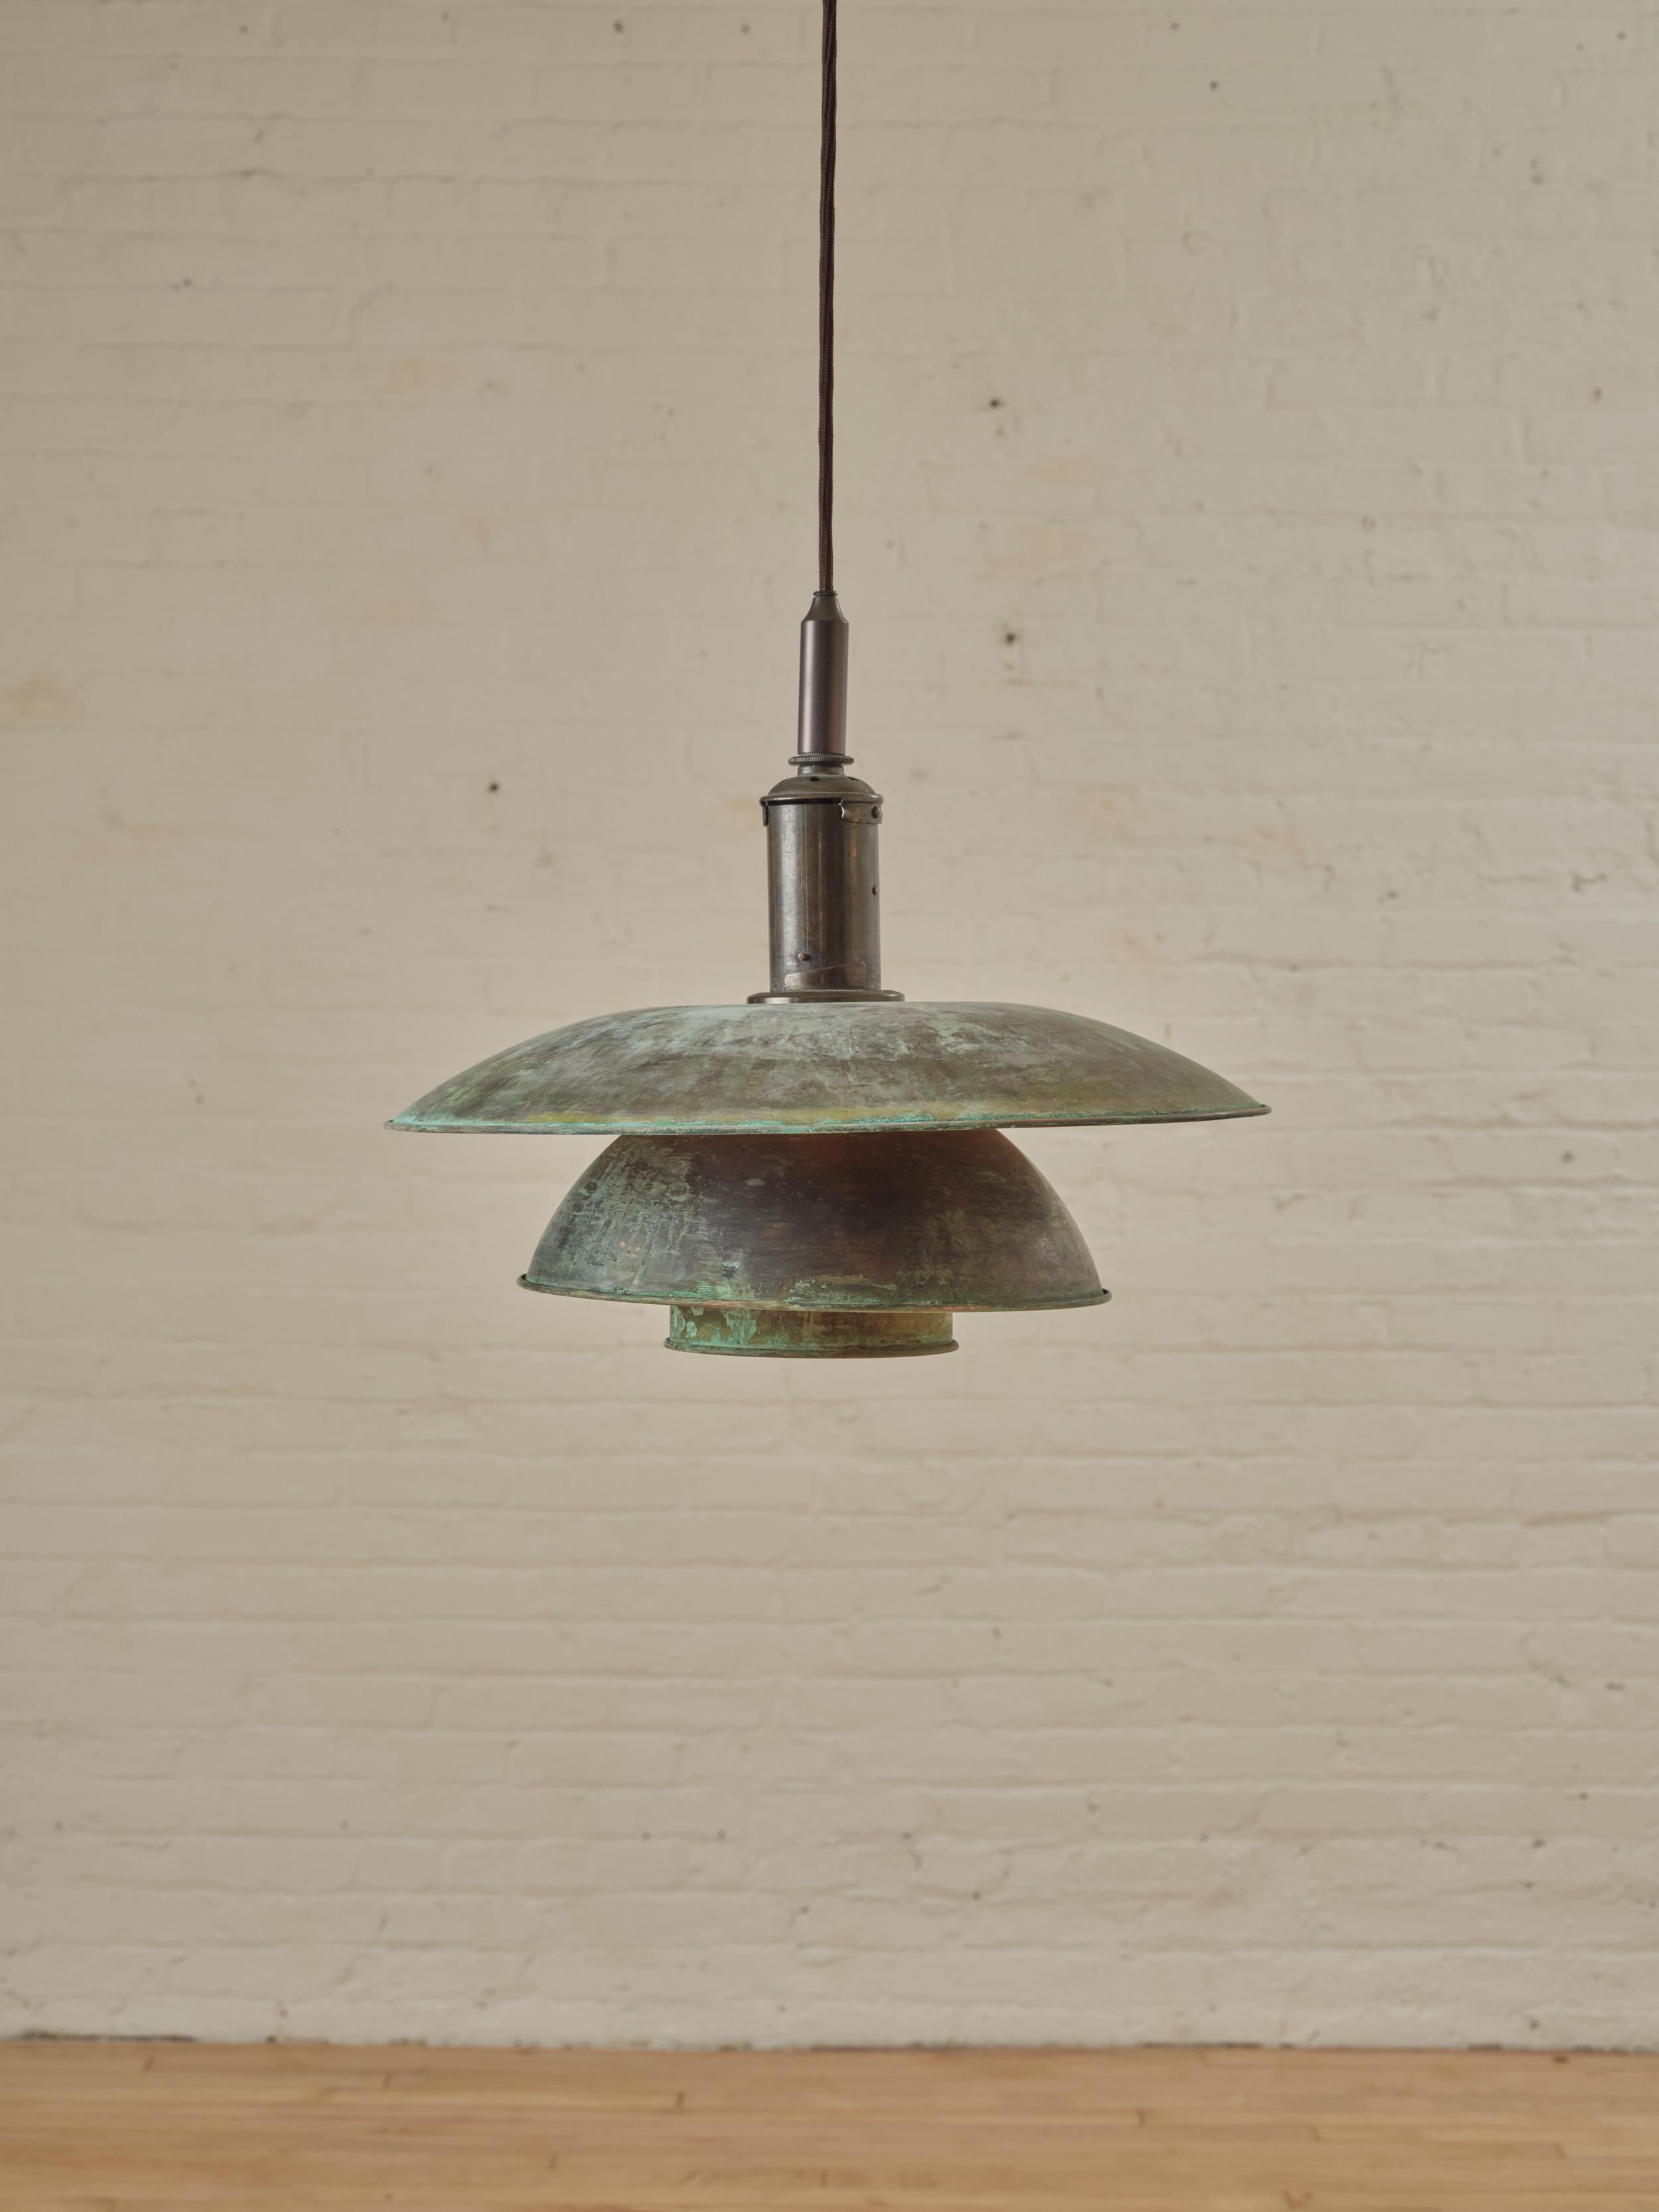 PH 4/4 Ceiling Pendant by Poul Henningsen for Louis Poulsen in patinated copper. The pendant can be rewired to fit ceiling height. 

Dimensions: 25.59